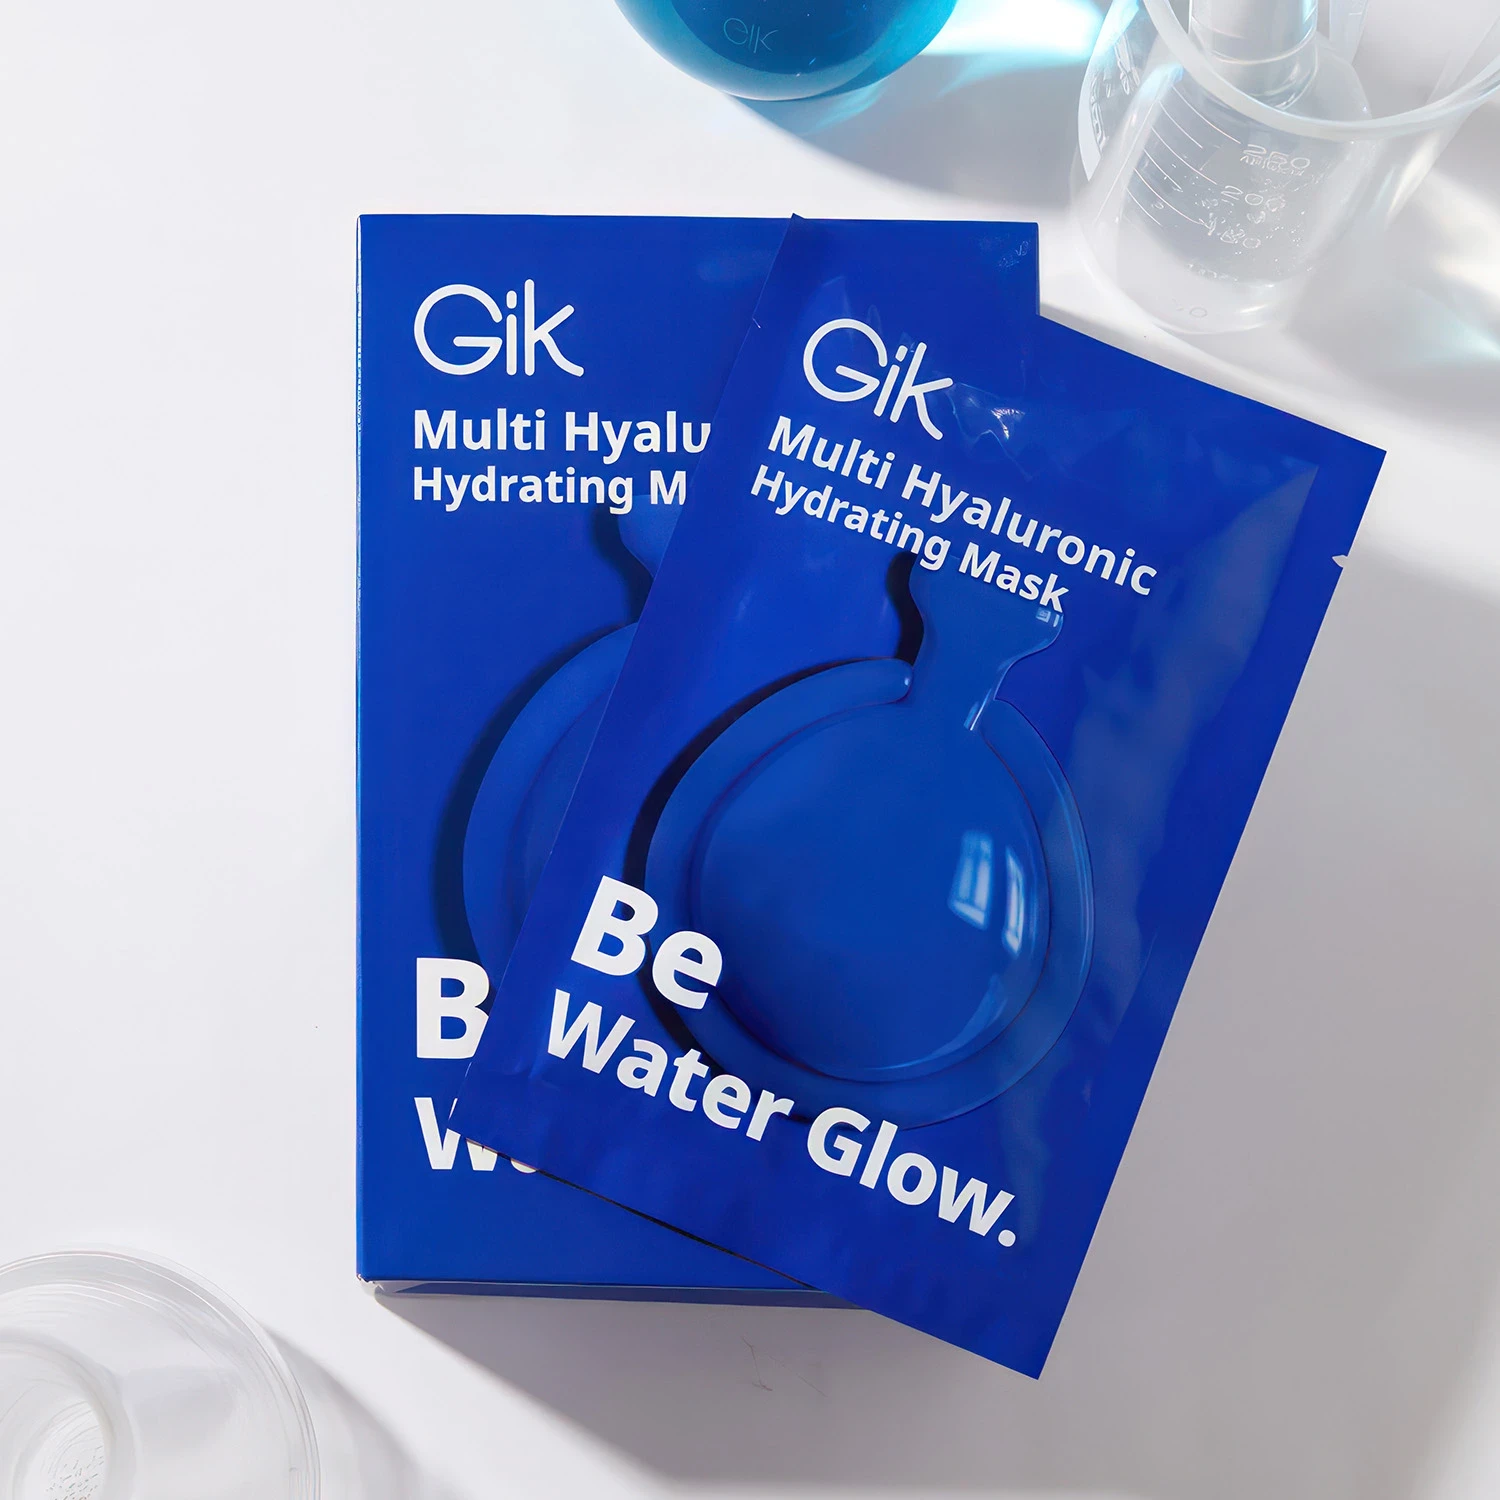 be water glow